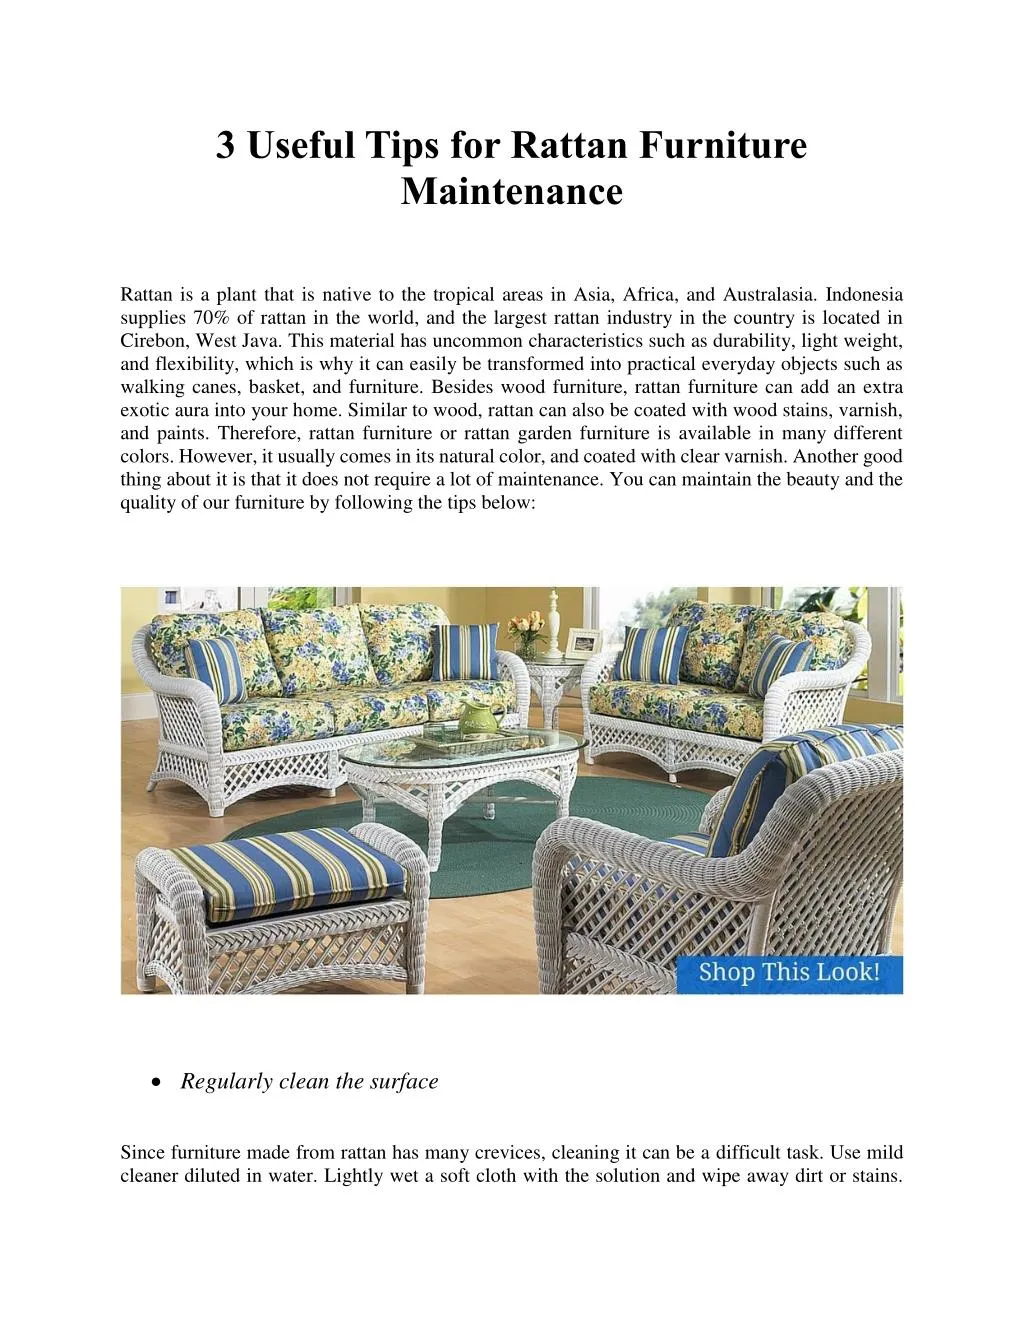 Ppt 3 Useful Tips For Rattan Furniture Maintenance Powerpoint